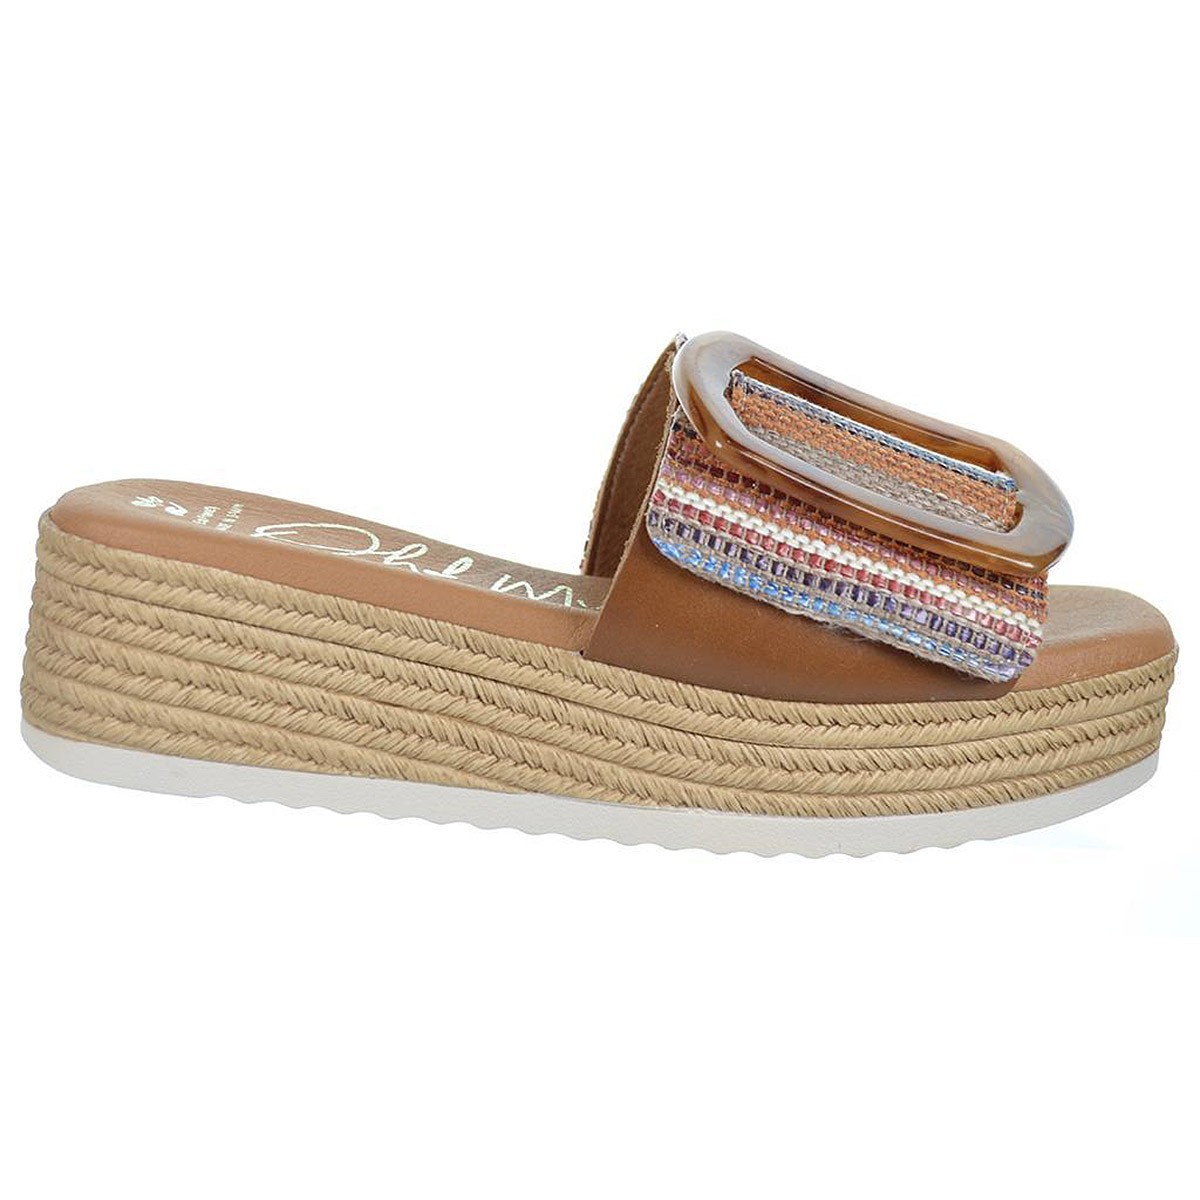 5212 Oh My Sandals Sandalia Confort plataforma Mujer Oh! My Sandals - 1